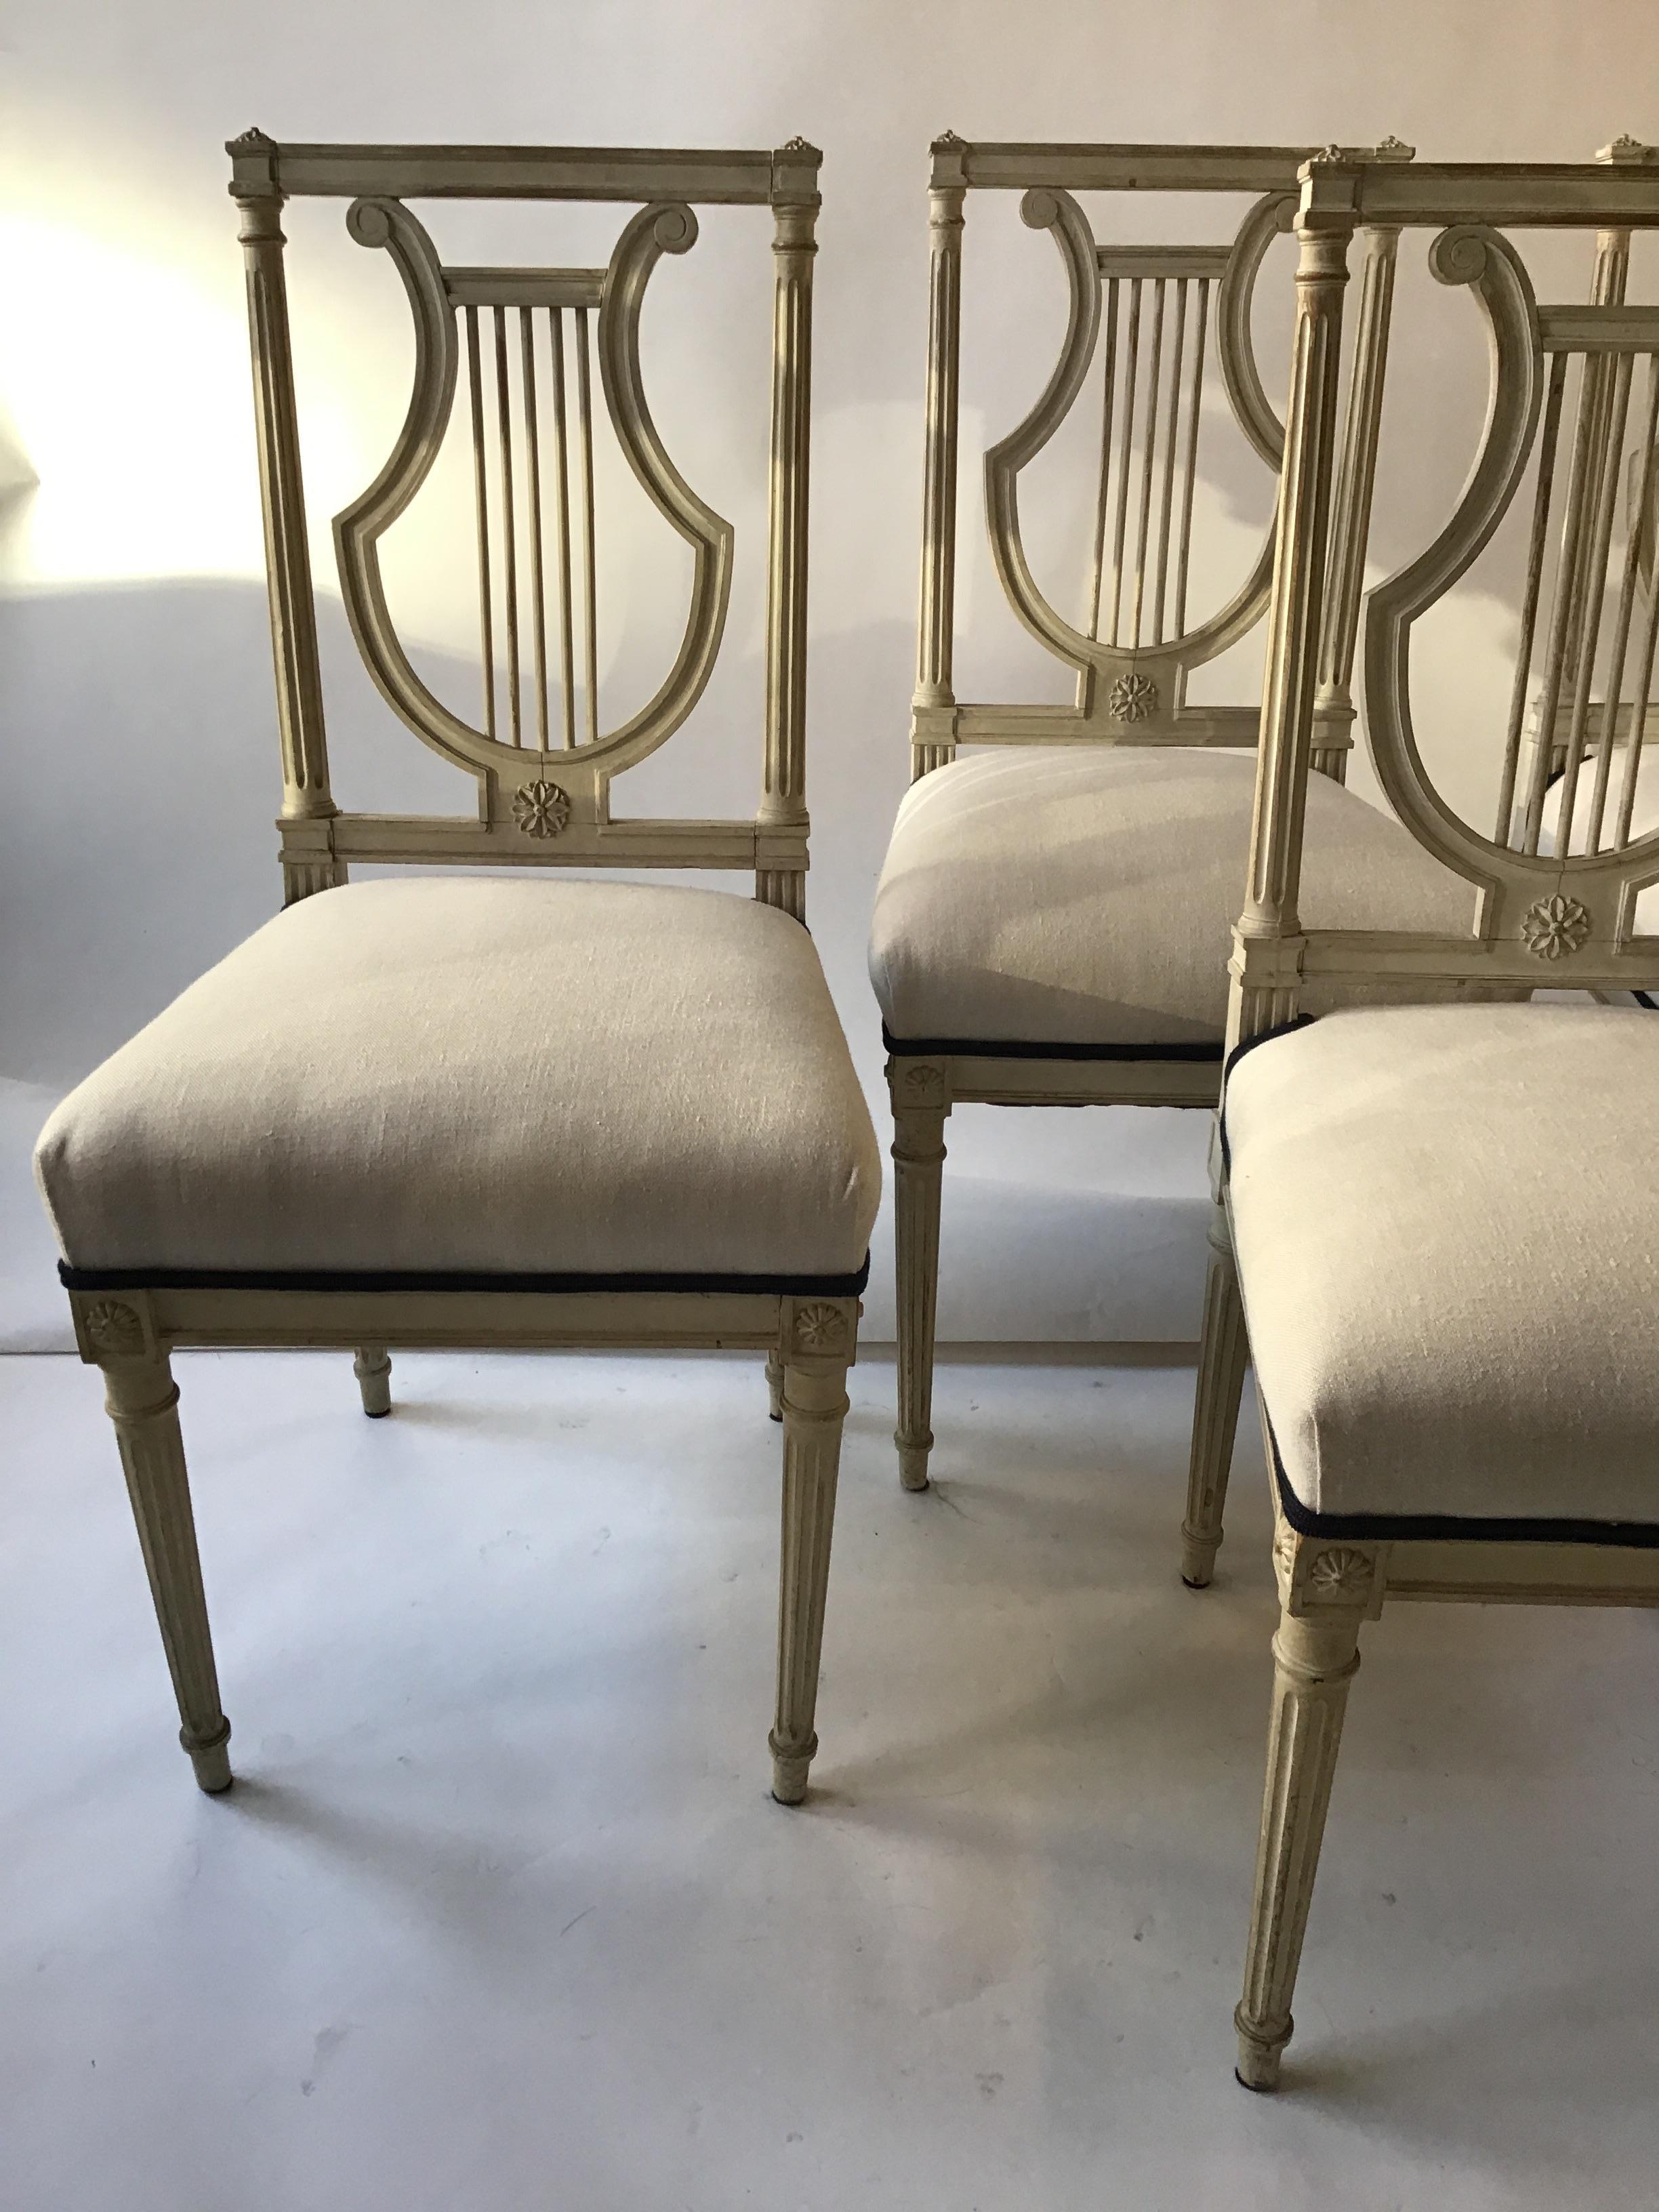 4 French 1950s lyre back side chairs with Louis XVI leg, painted white. Upholstered a few years back.